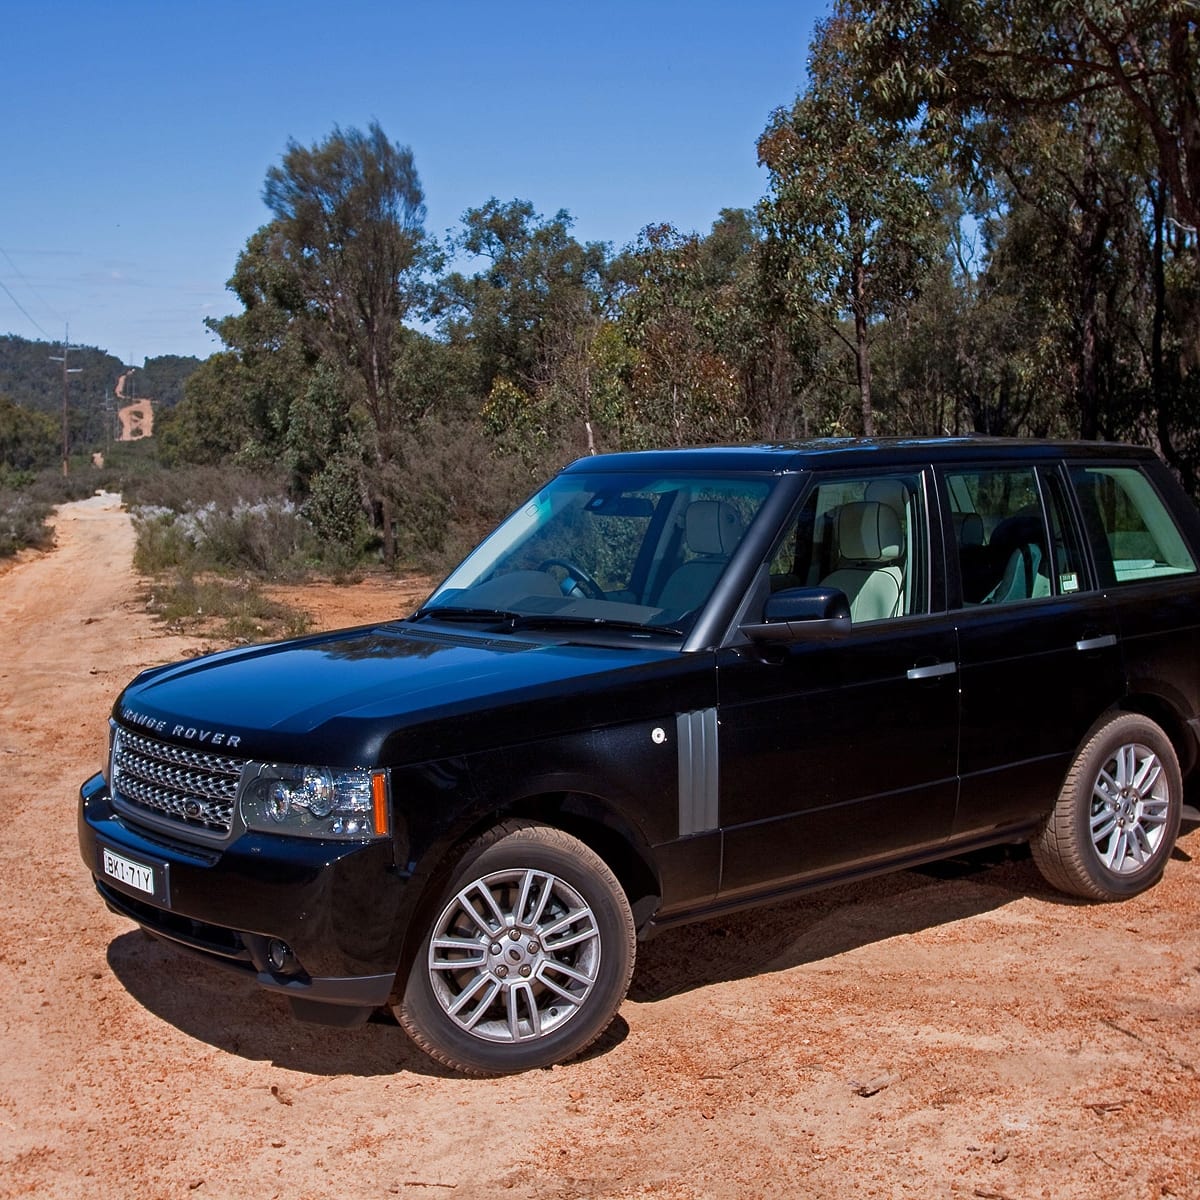 Range Rover Vogue Pic  . We Hope You Enjoy Our Growing Collection Of Hd Images.